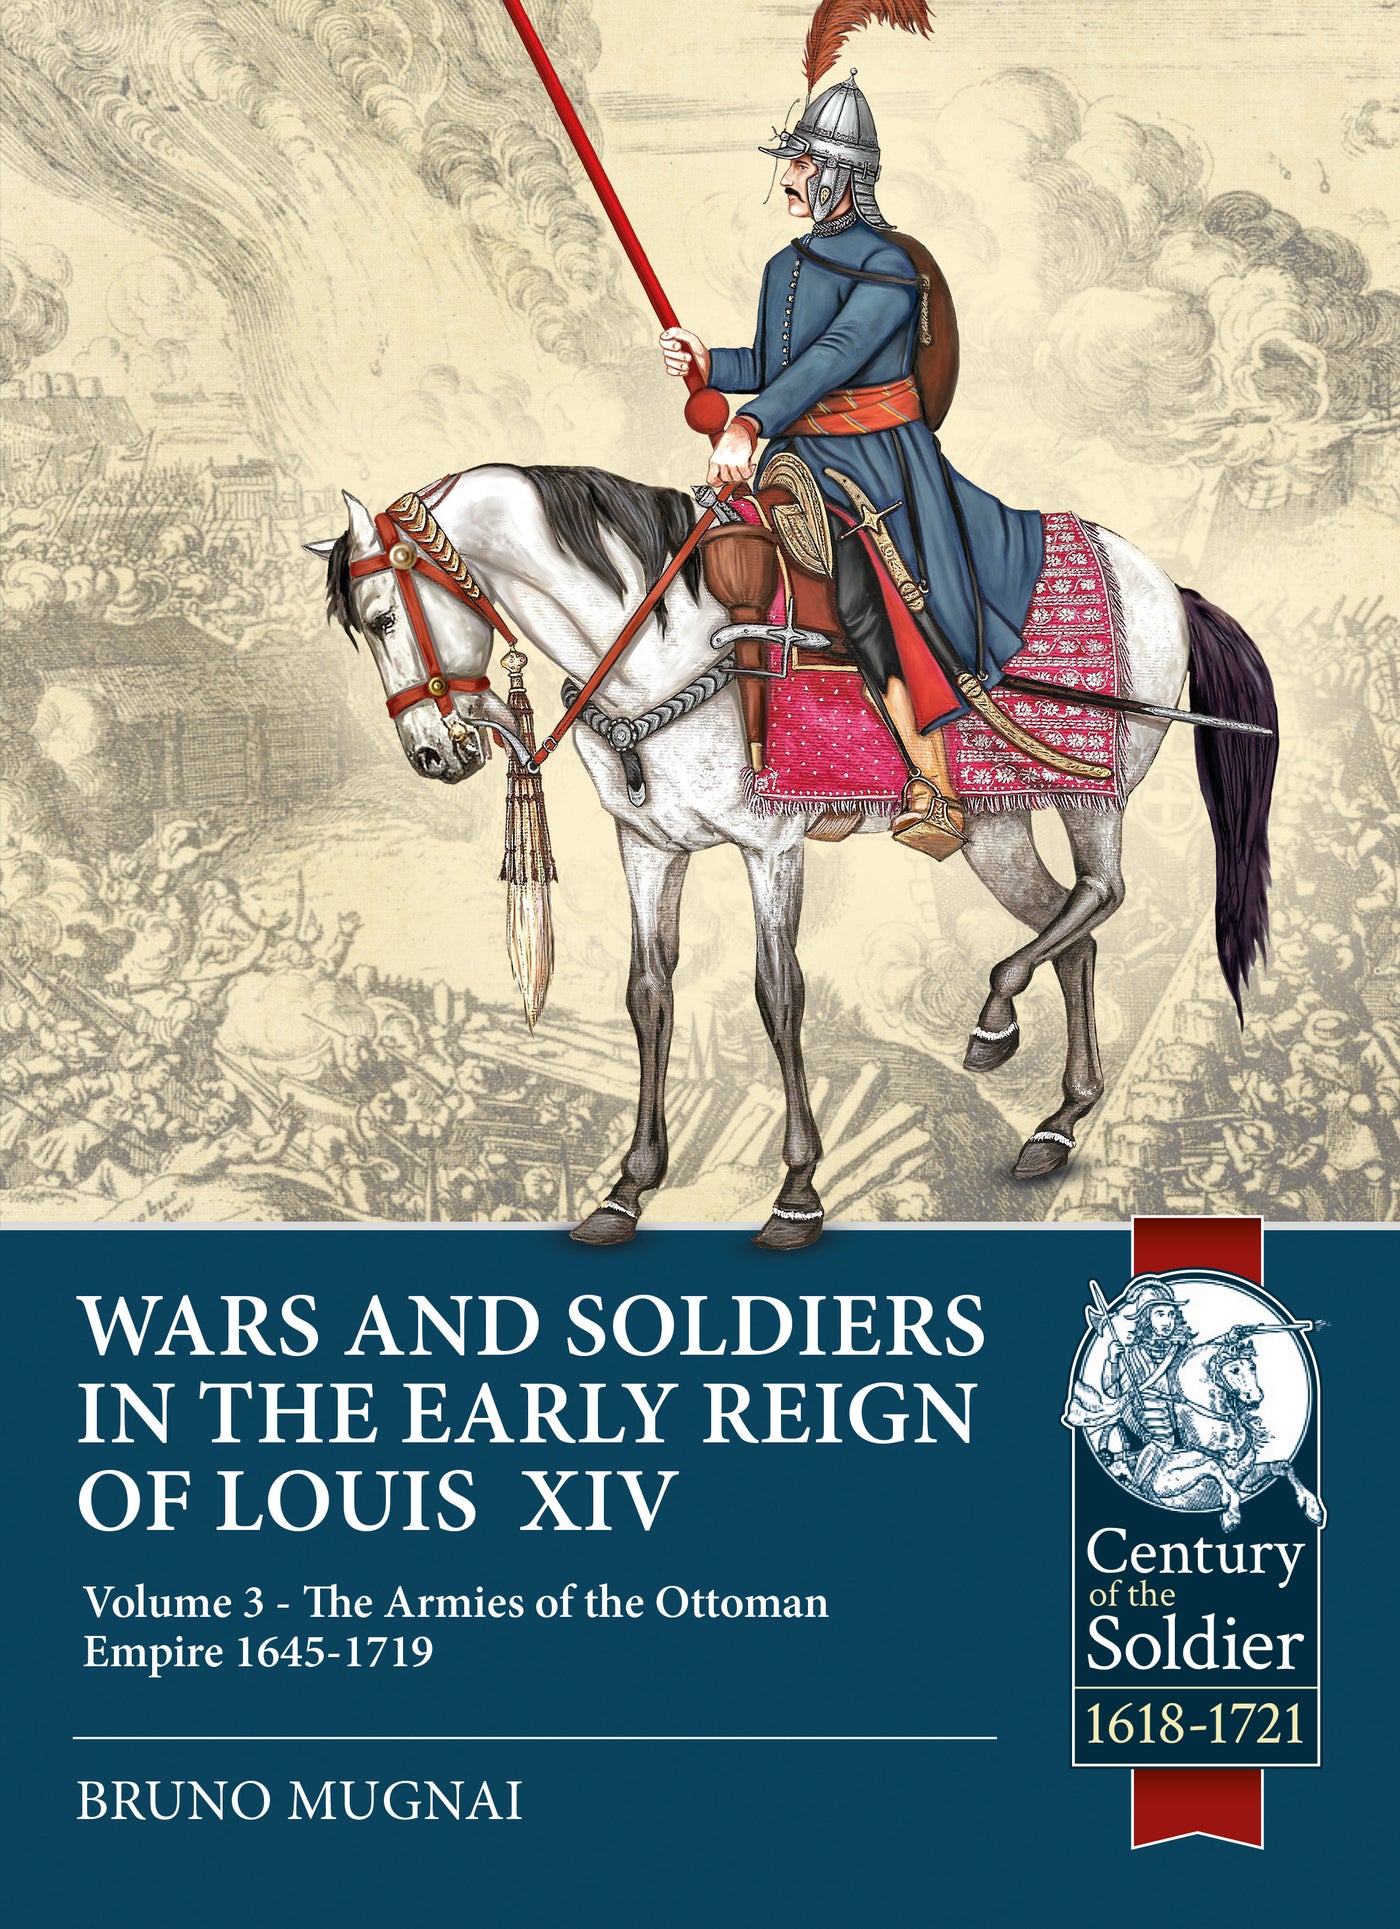 Wars and Soldiers in the Early Reign of Louis XIV, Volume 3